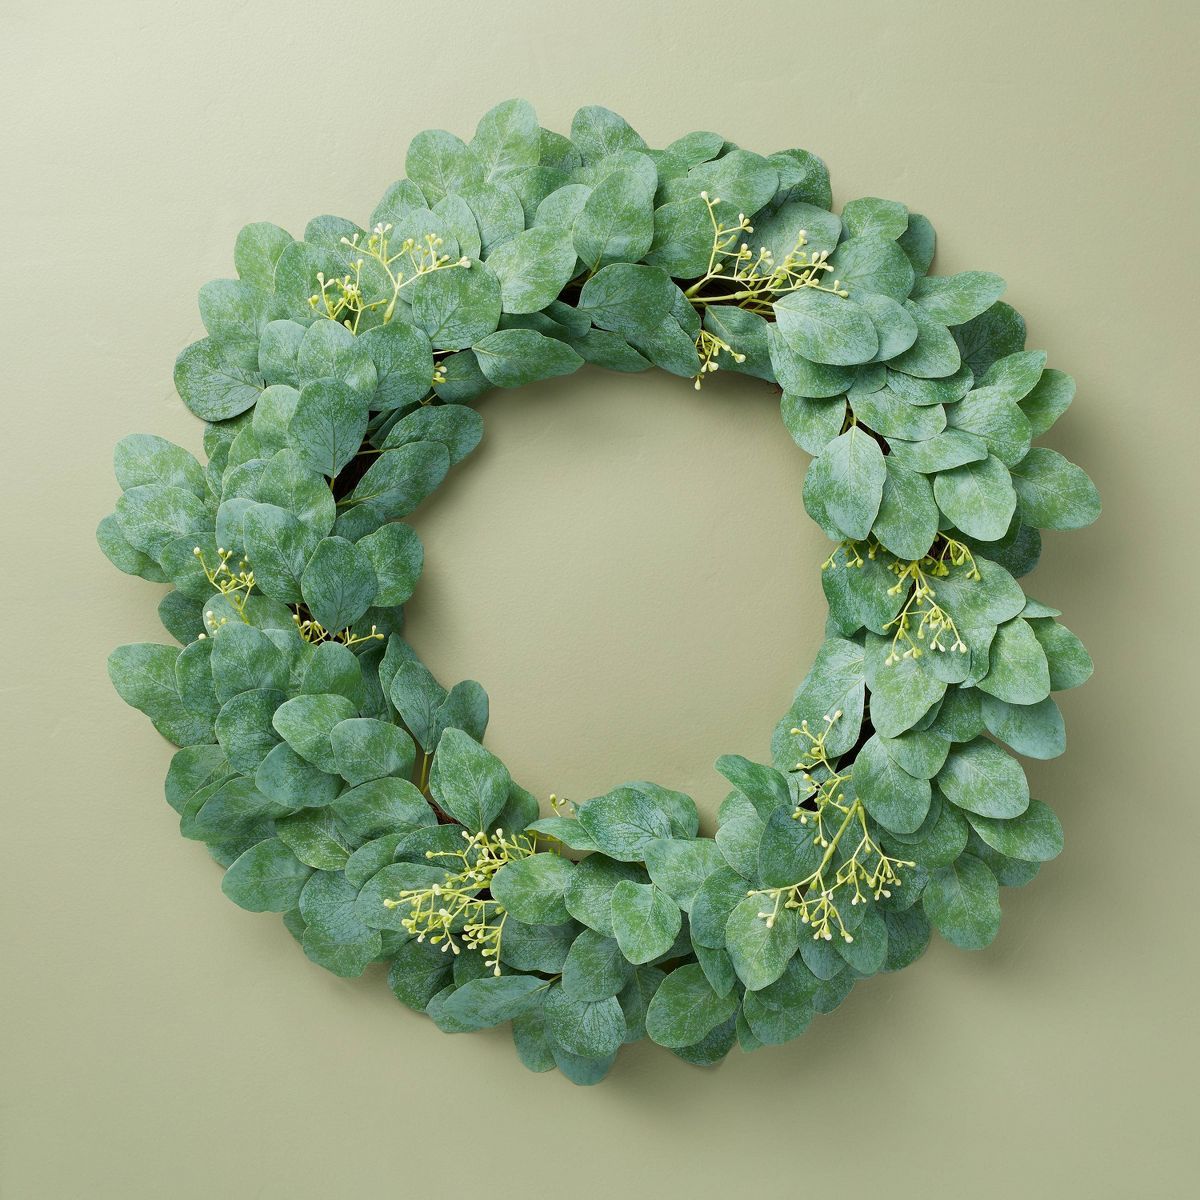 26" Faux Seeded Eucalyptus Wreath - Hearth & Hand™ with Magnolia | Target